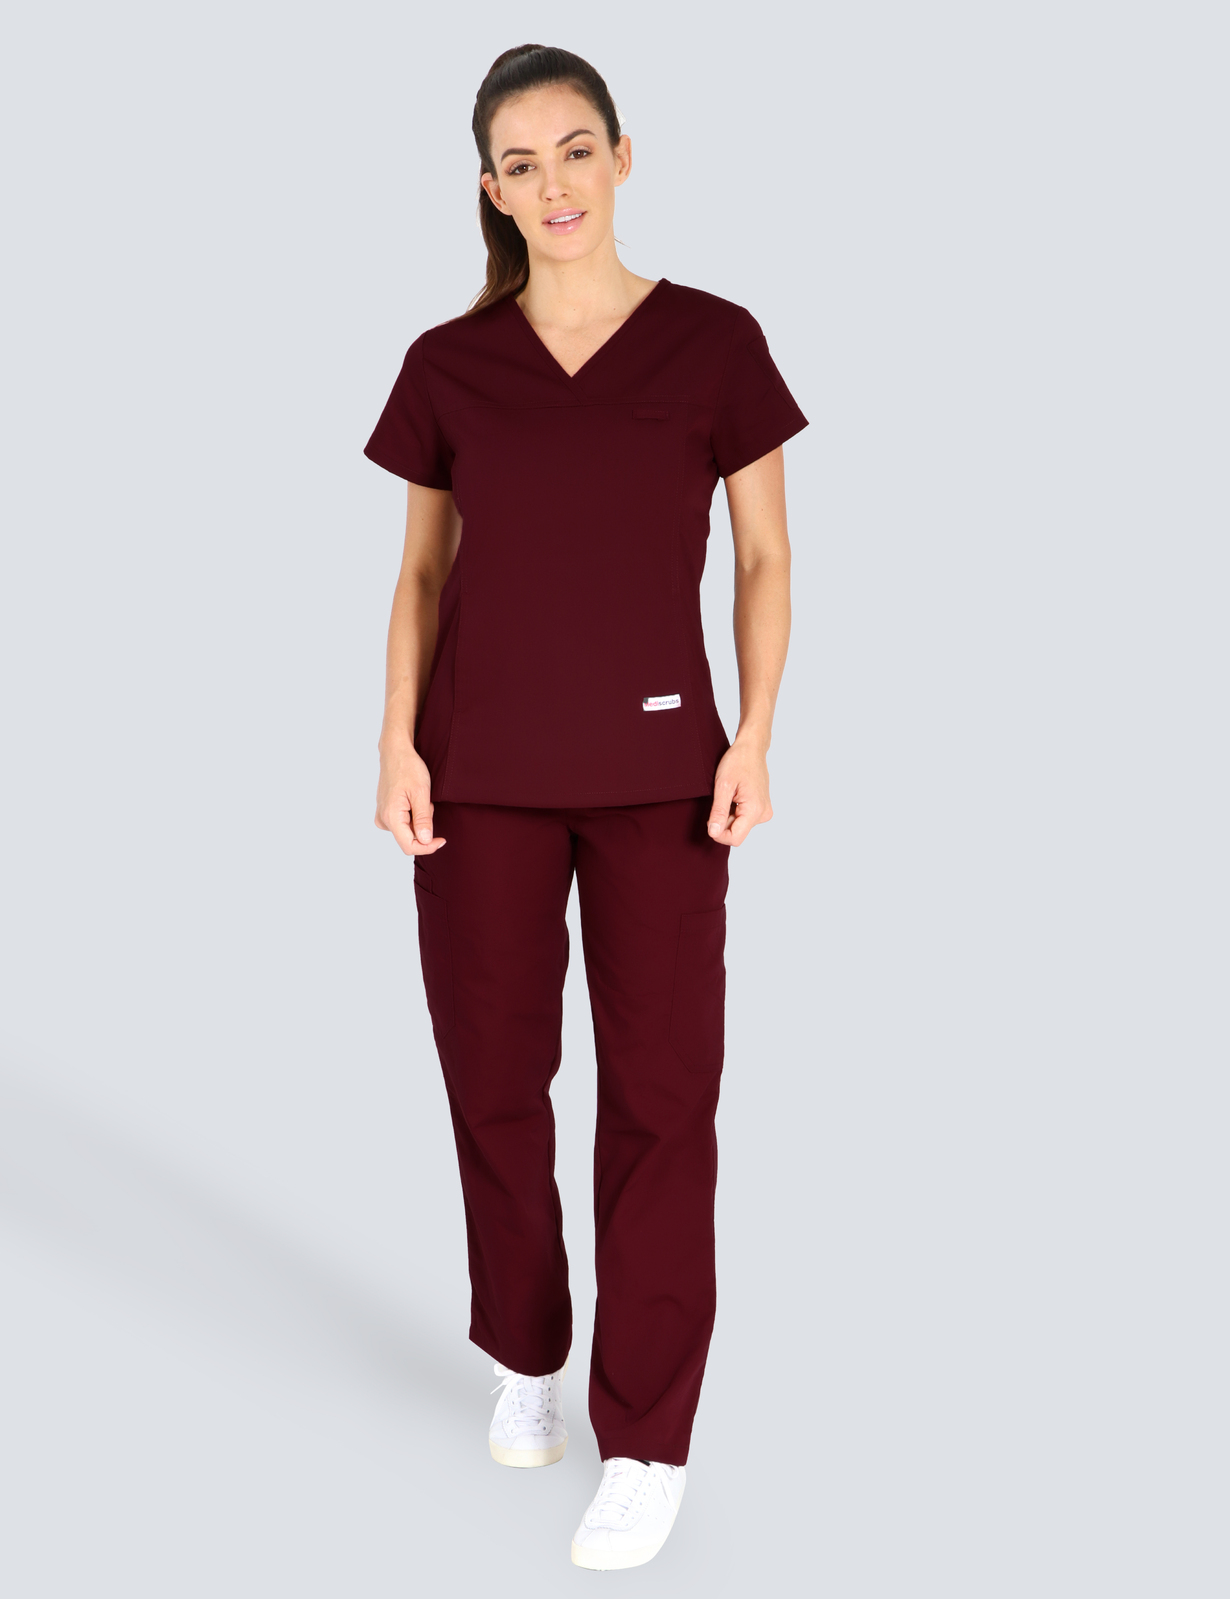 Redcliffe Hospital - ED EN (Women's Fit Solid Scrub Top and Cargo Pants in Burgundy incl Logos)